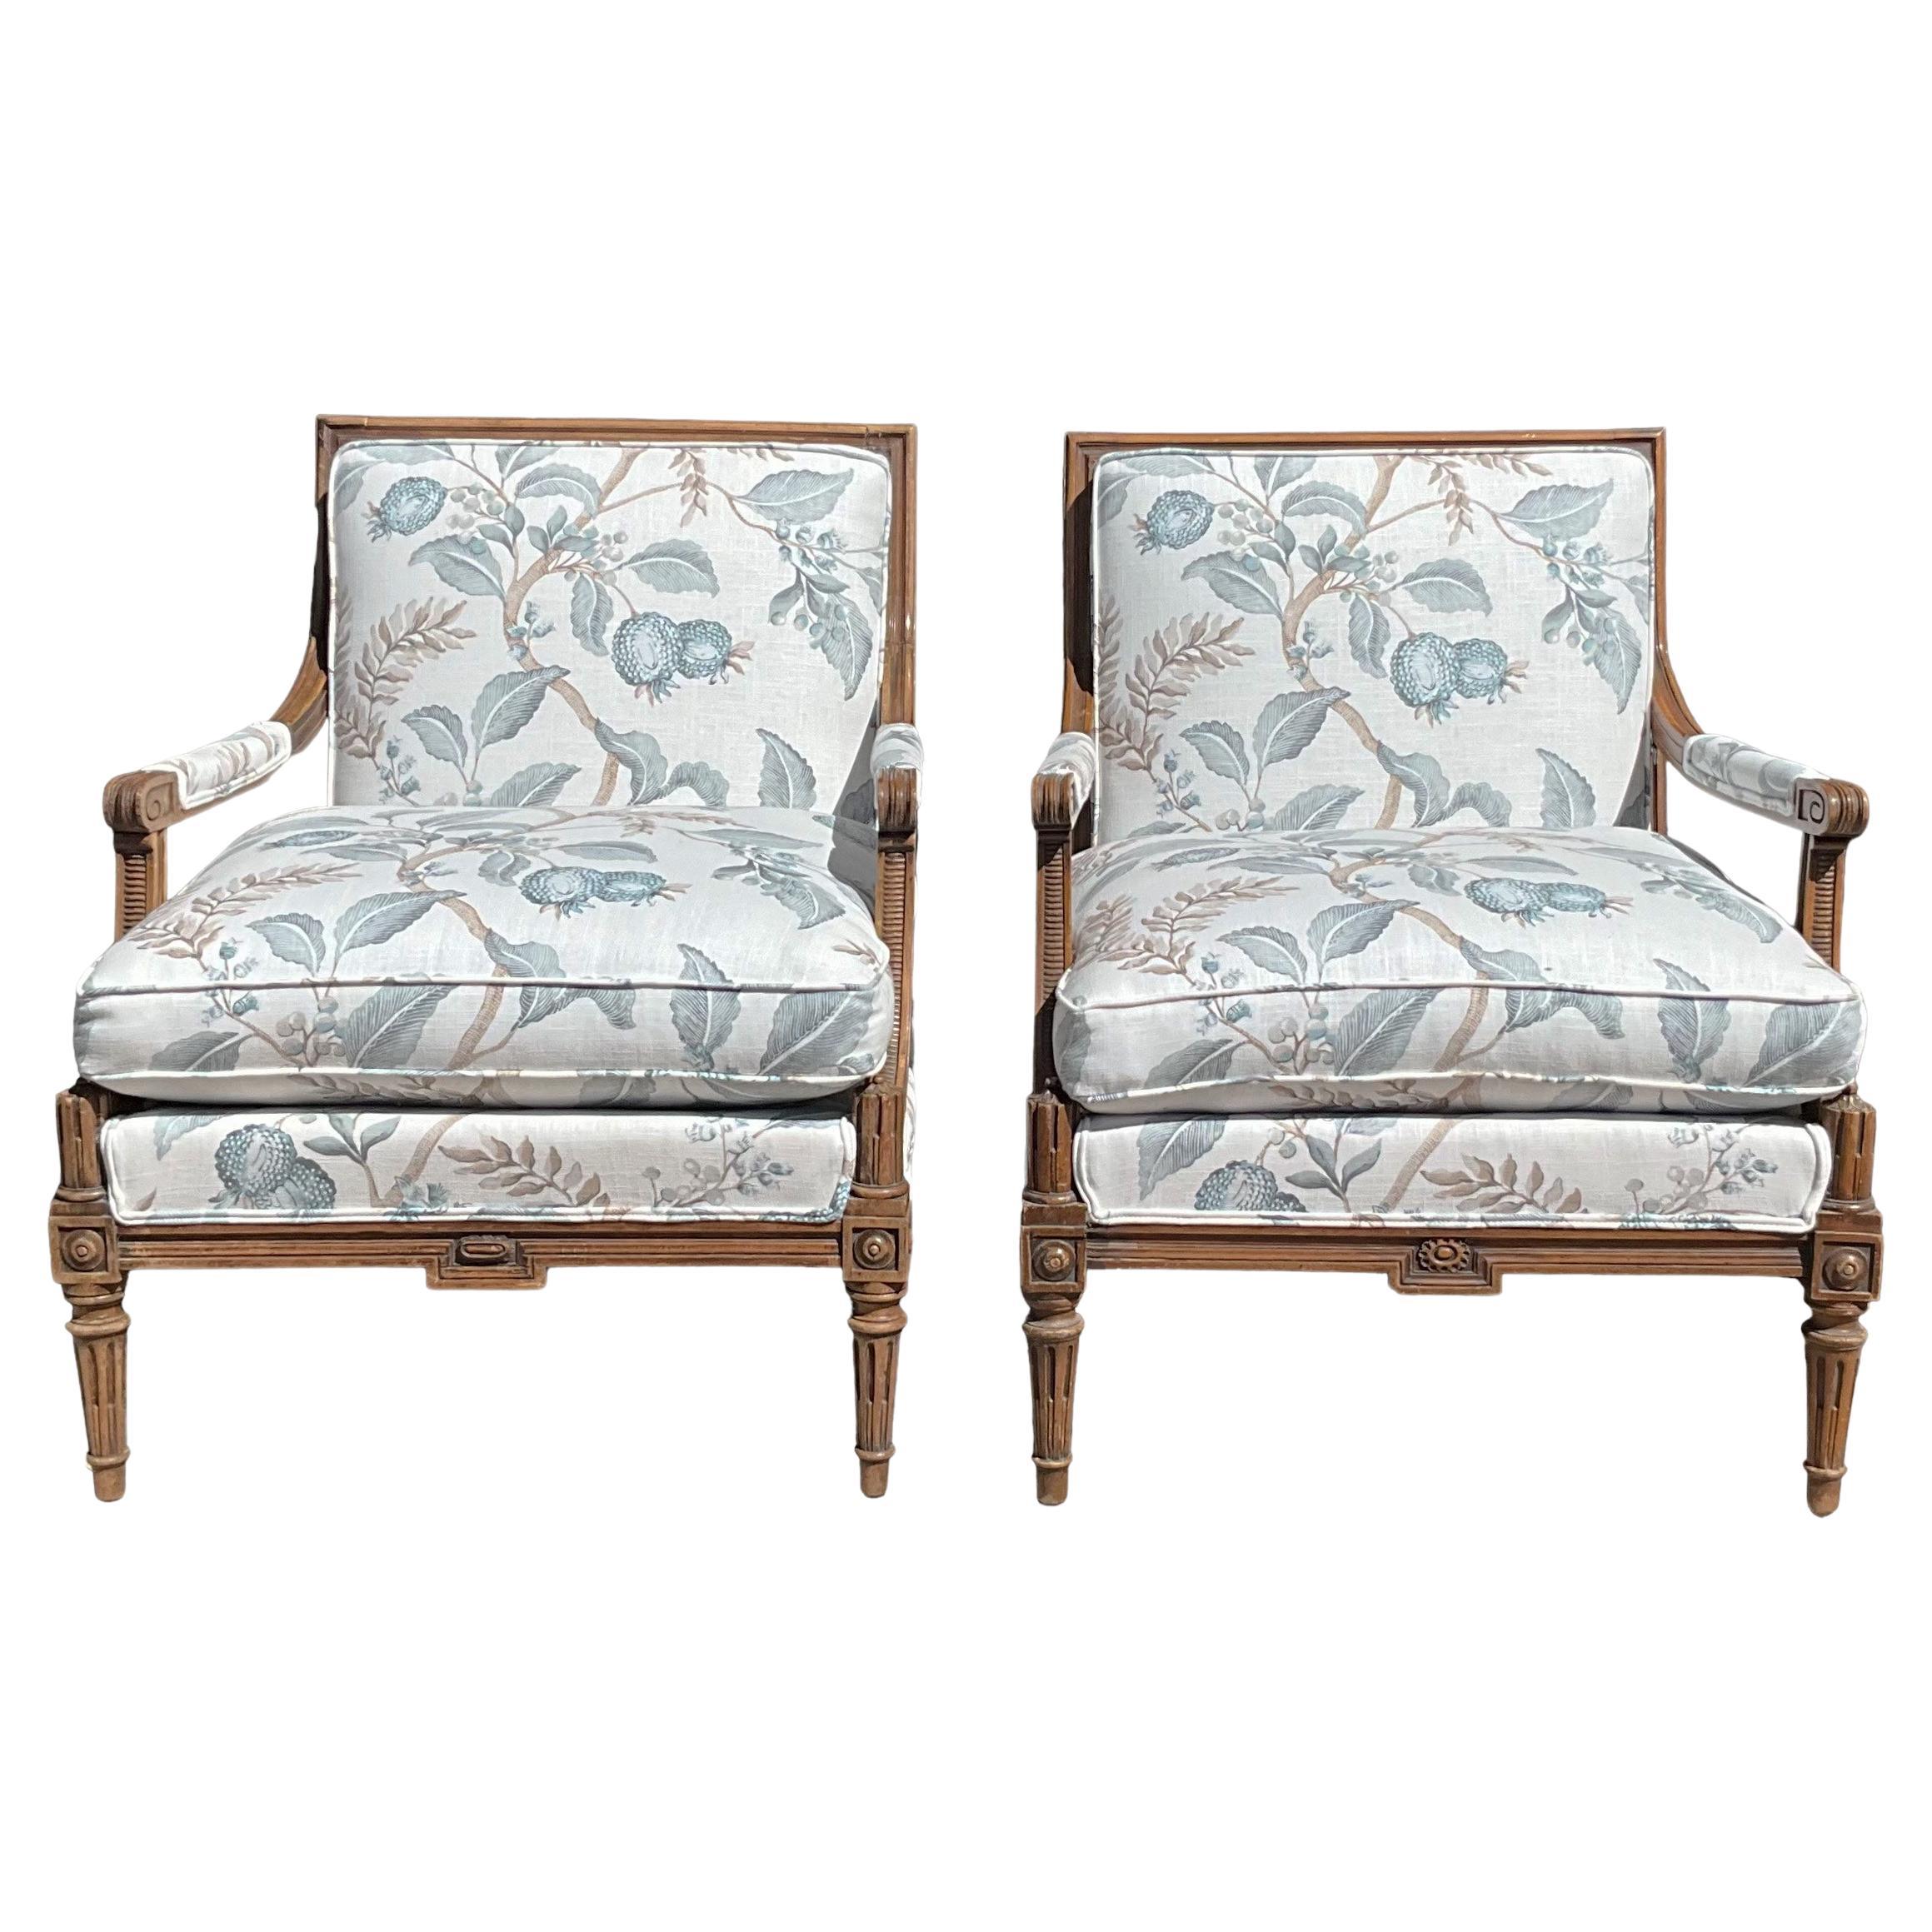 Early 20th-C. French Carved Walnut Bergere Chairs In New Floral Linen -Pair For Sale